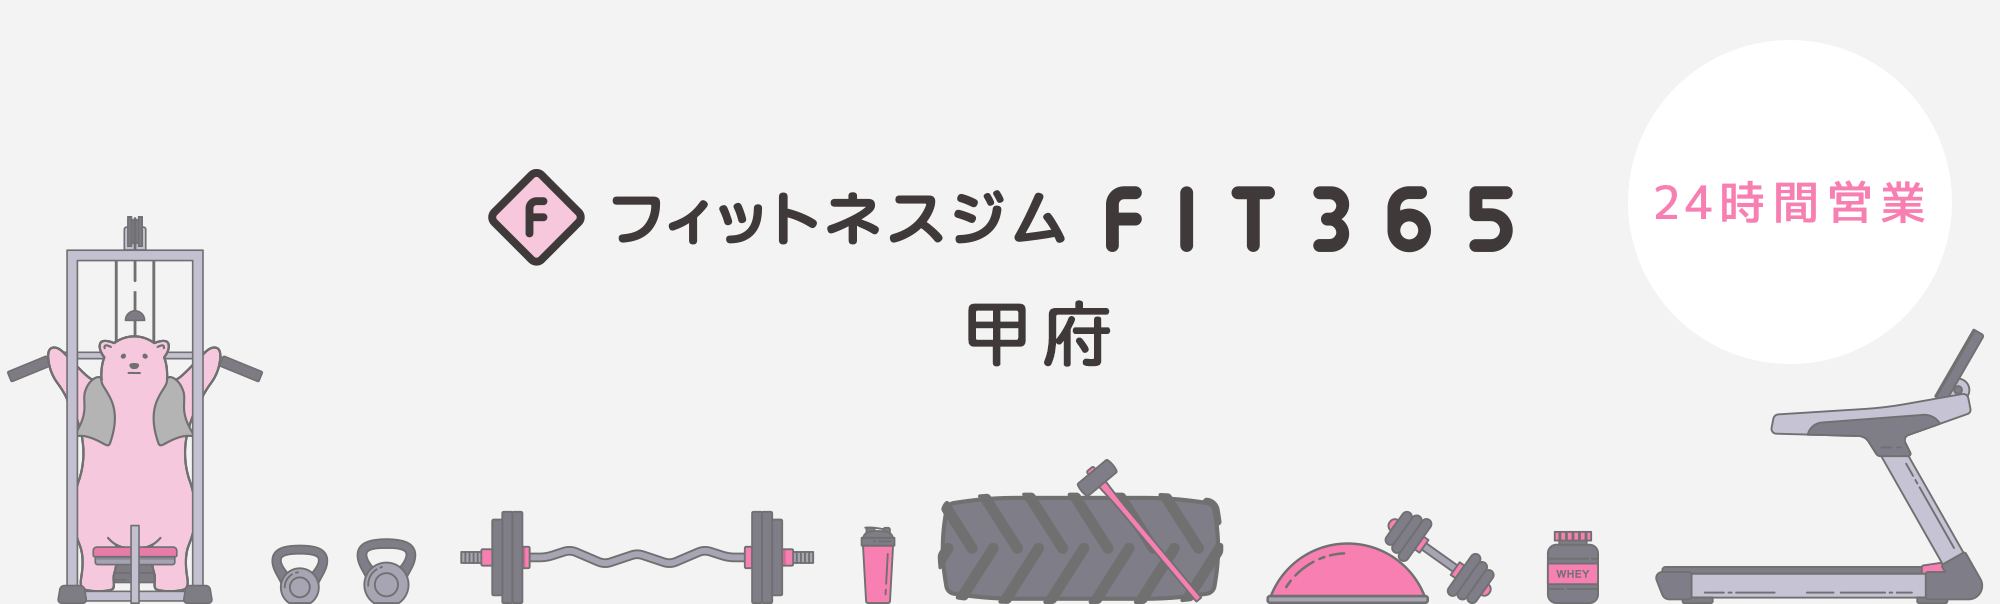 FIT365 甲府